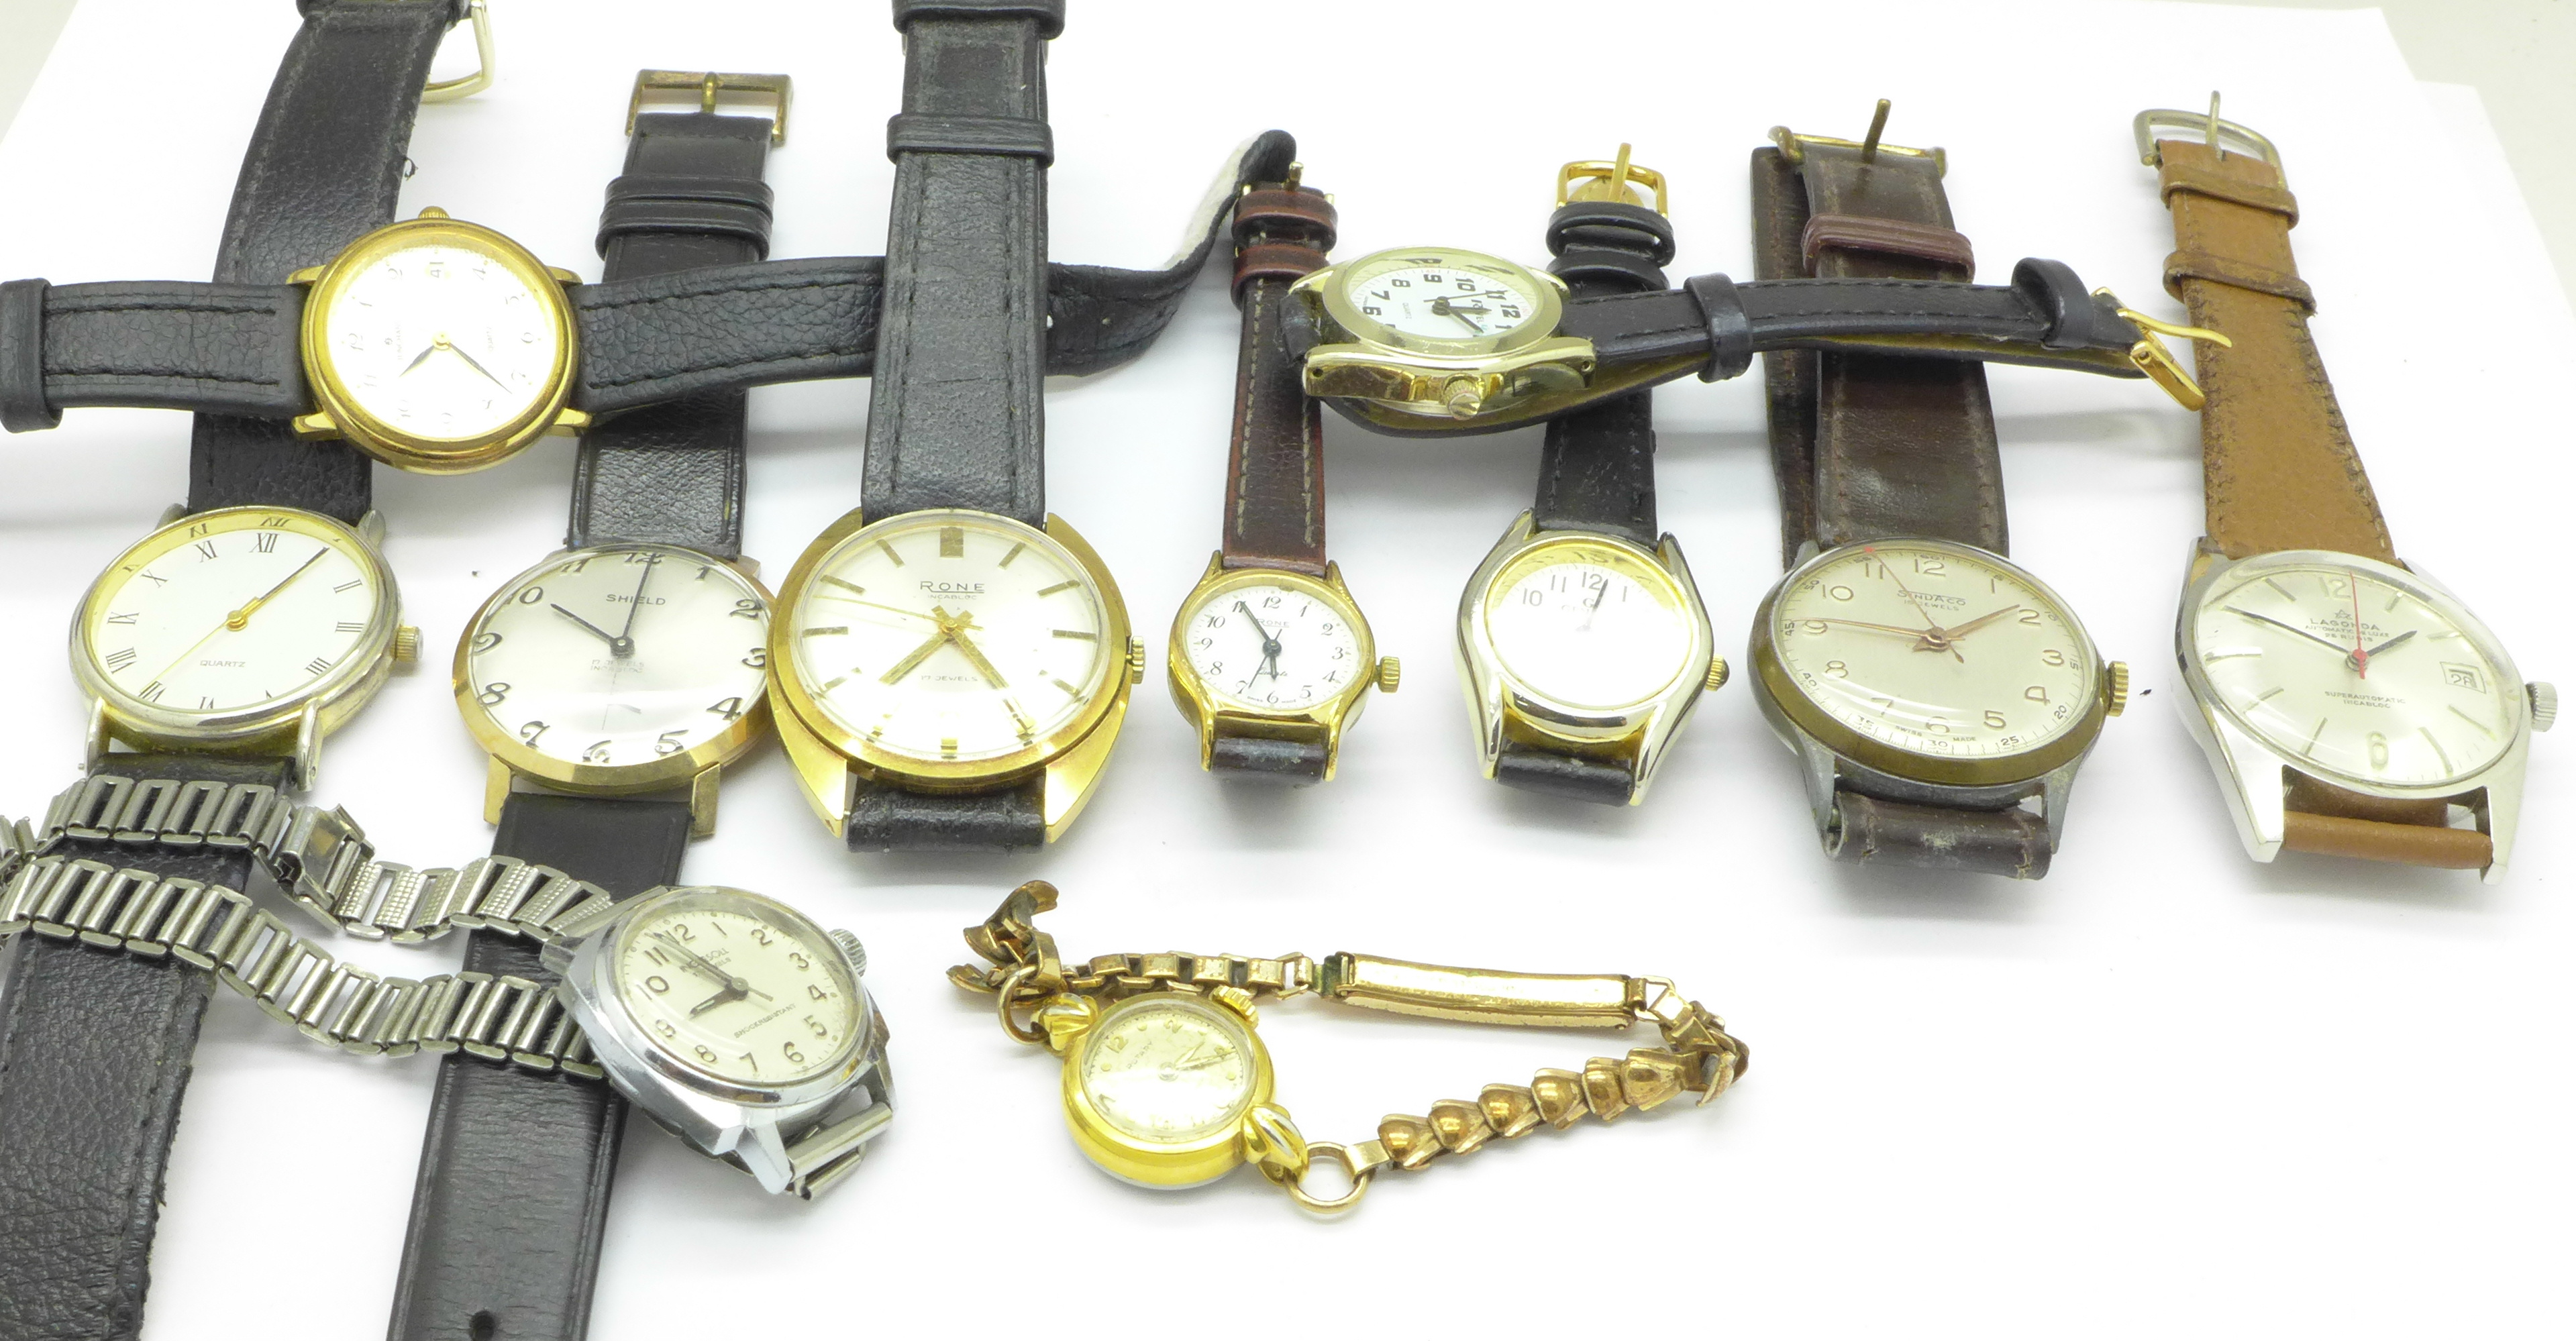 Lady's and gentleman's wristwatches including Ingersoll, Sindaco,